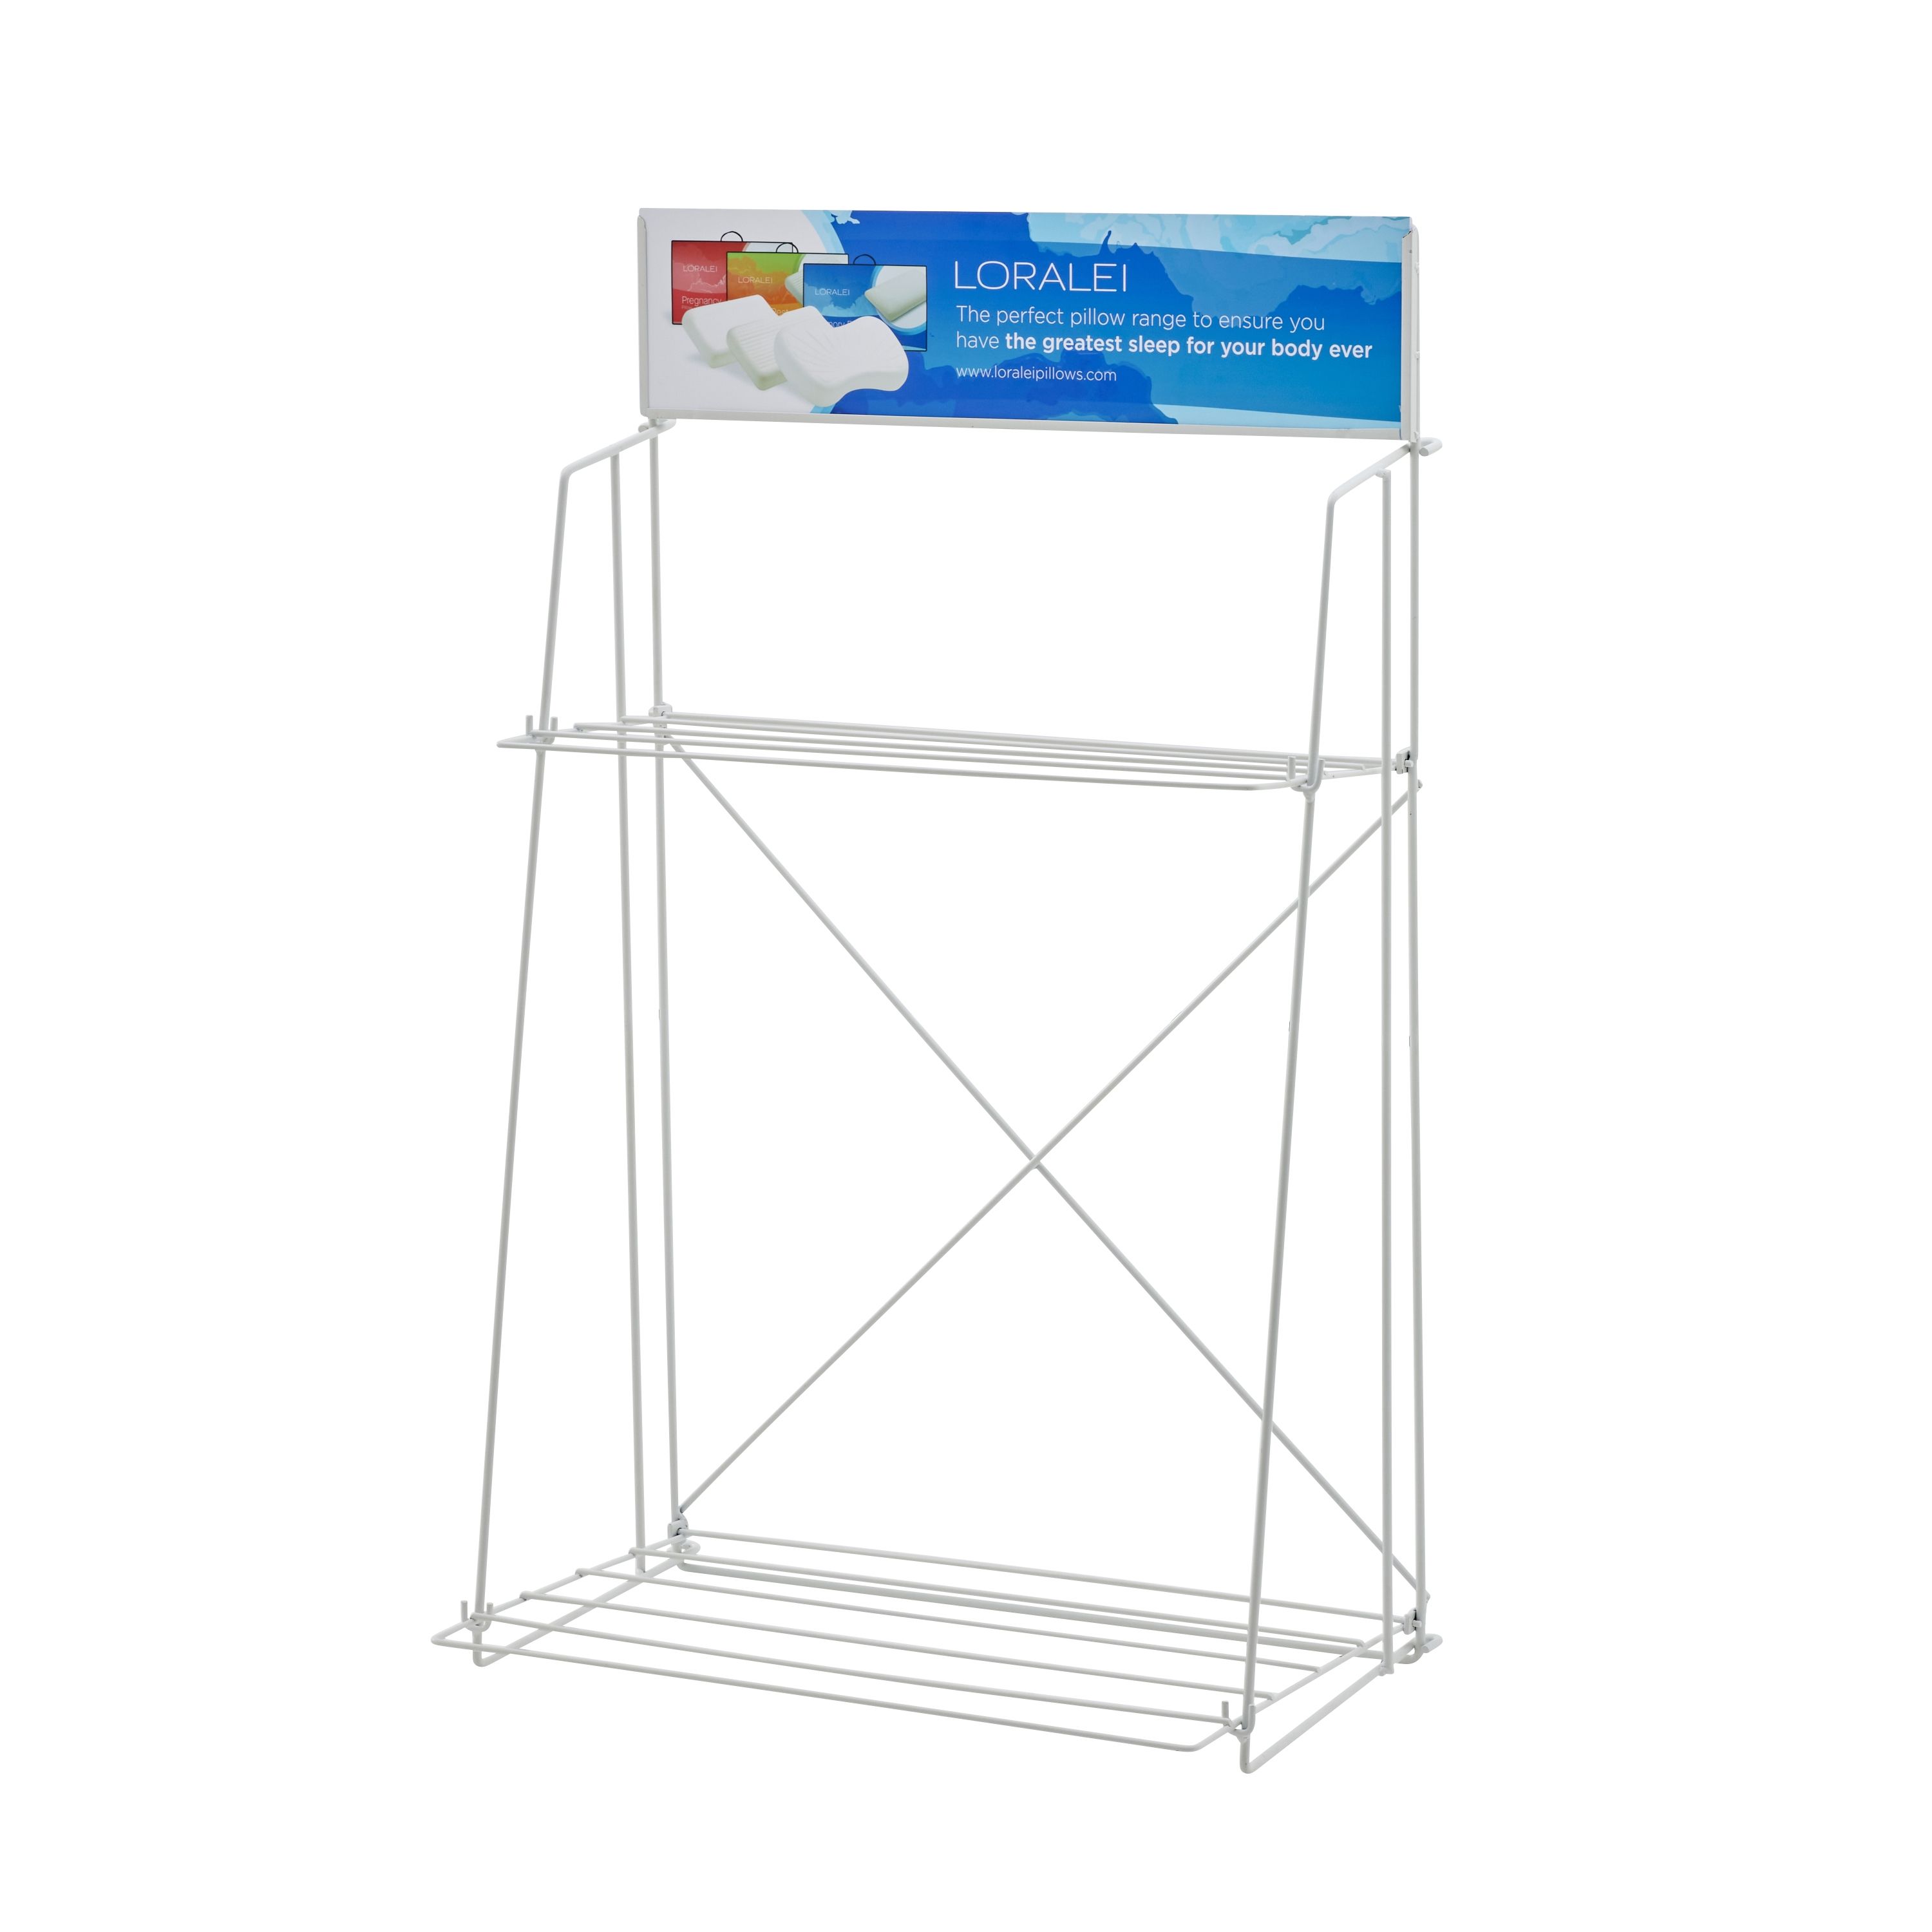 LORALEI PILLOW DISPLAY STAND photo